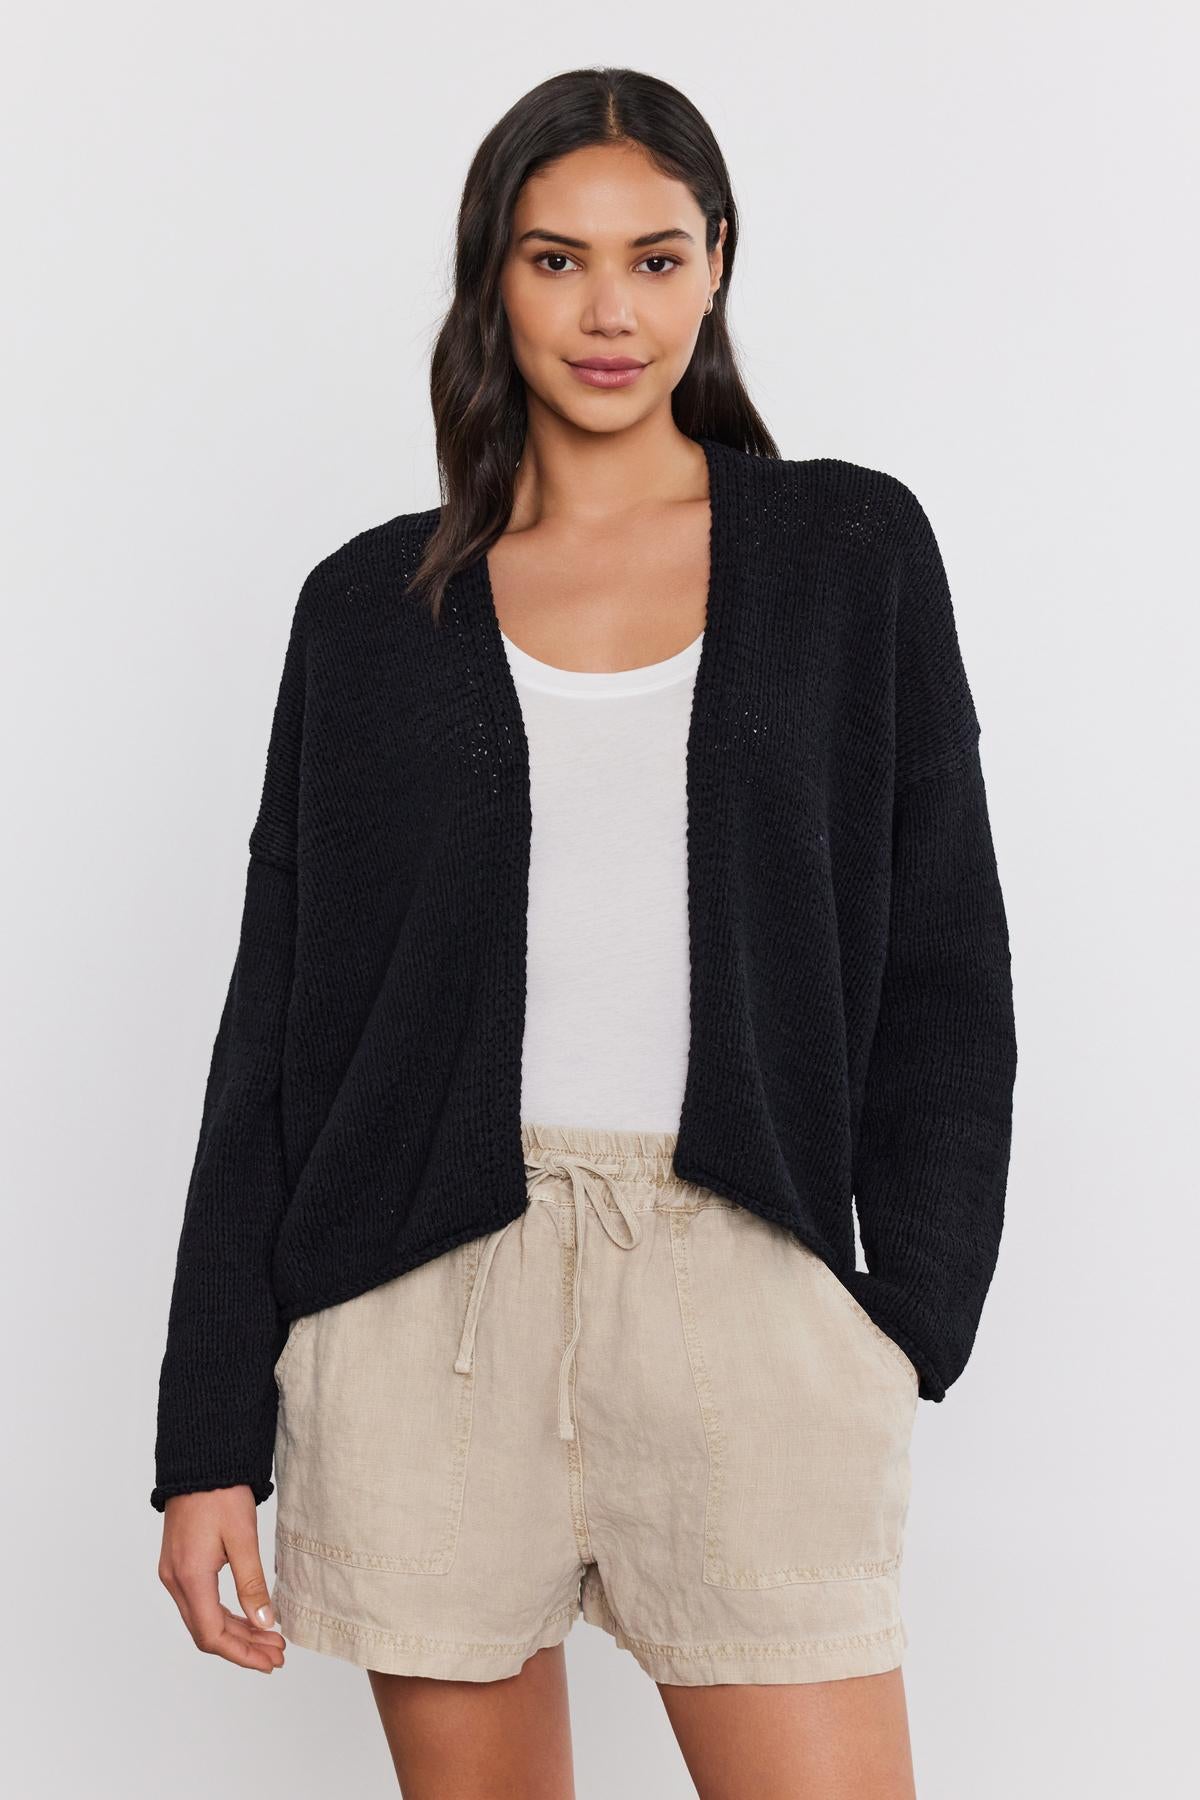 A woman wearing a black Velvet by Graham & Spencer HOLLIE cardigan, white top, and beige shorts, standing against a plain background.-36910017413313